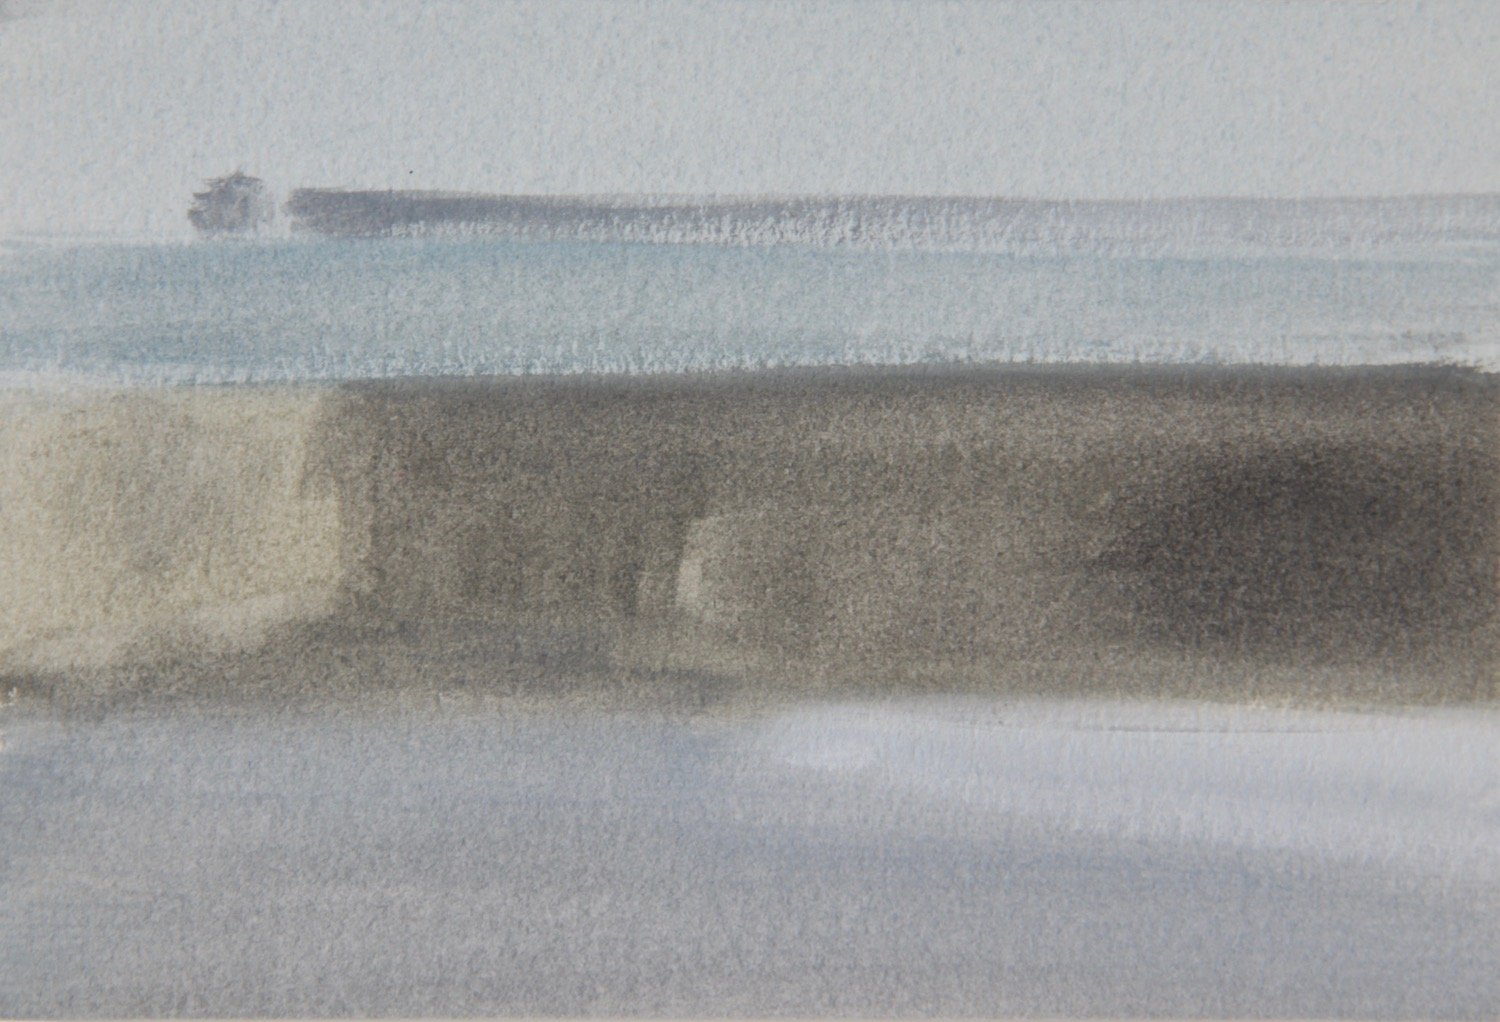 Pier and Headland II, Oil on Arches Oil Paper, 10 x 14.5cm